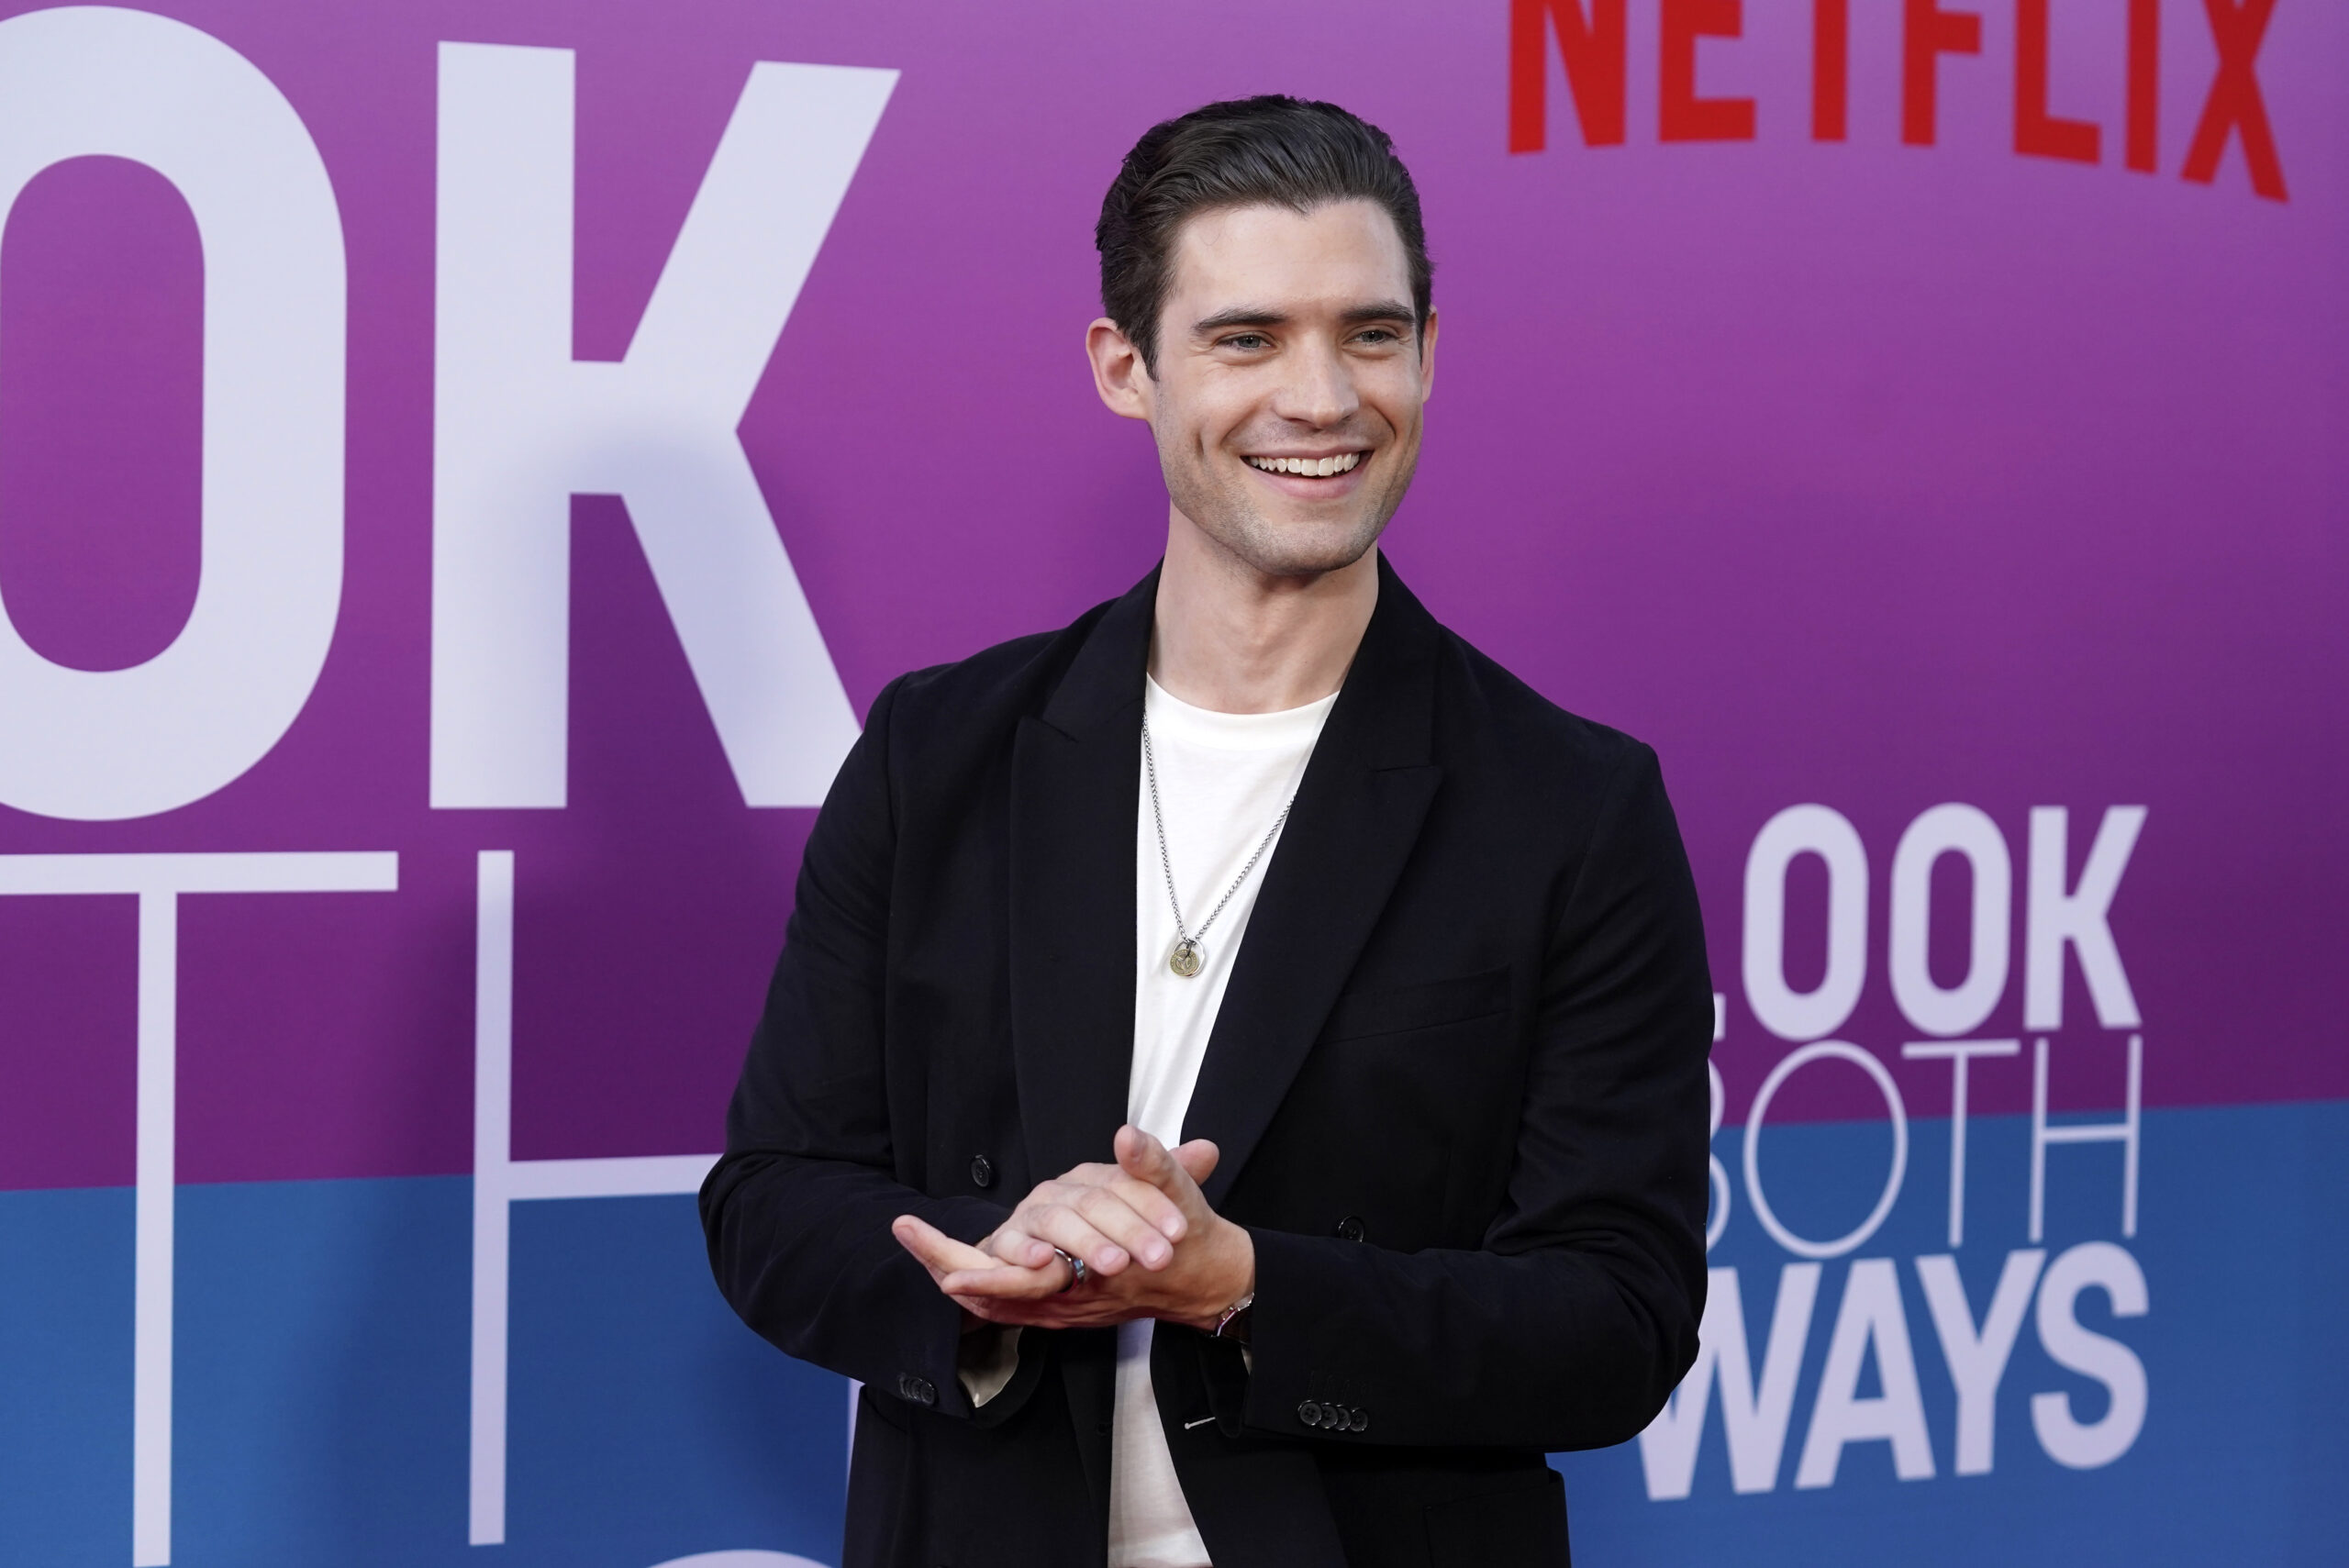 David Corenswet poses at the premiere of the Netflix film "Look Both Ways," Tuesday, Aug. 16, 2022, at the Tudum Theater in Los Angeles. (AP Photo/Chris Pizzello)